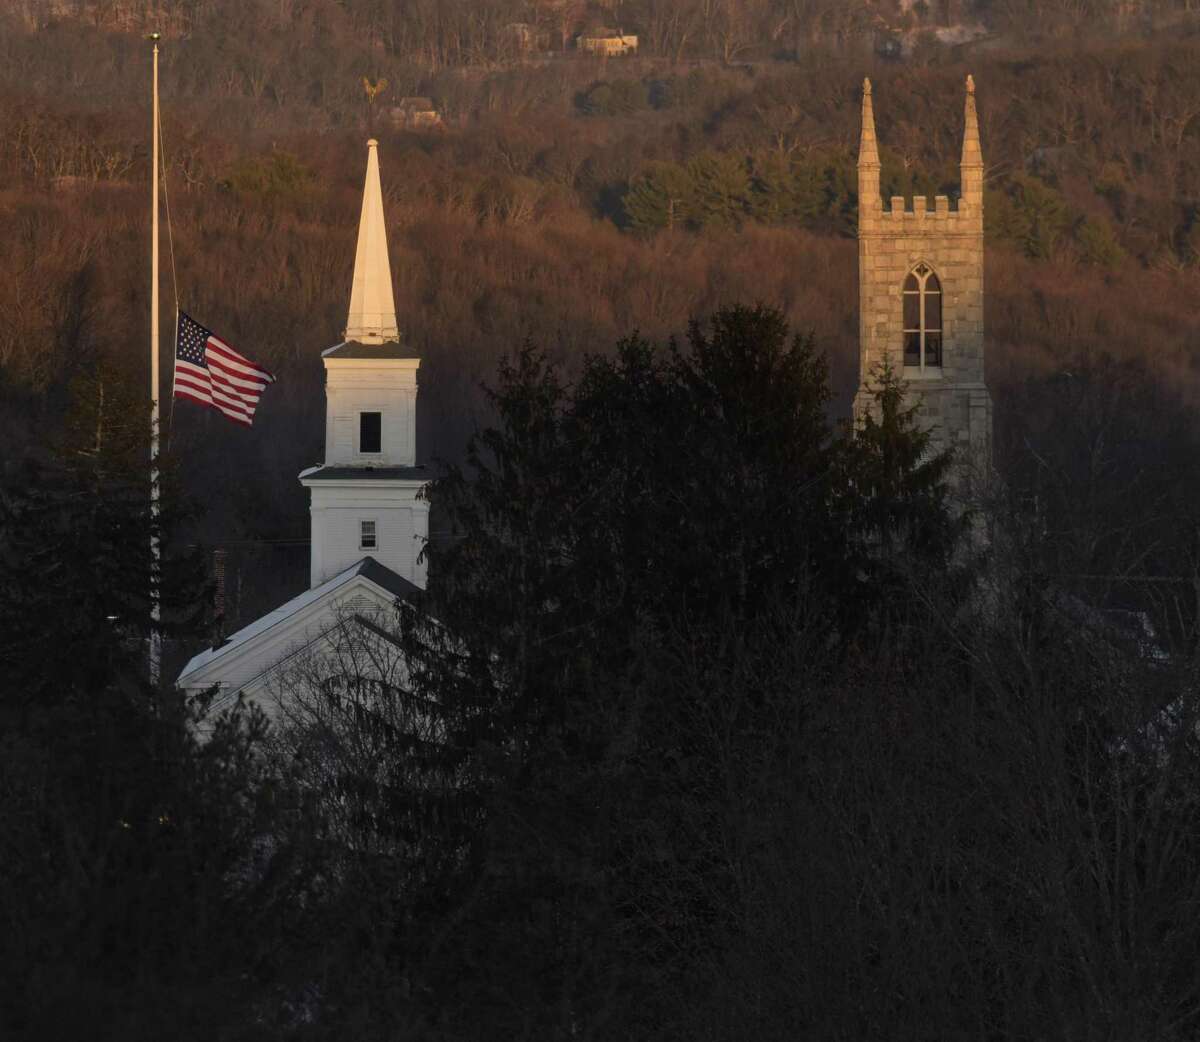 The flag on the Newtown flag pole flies at half-staff, like all the others across the state Thursday, in memory of the victims of the Sandy Hook Elementary School shooting.